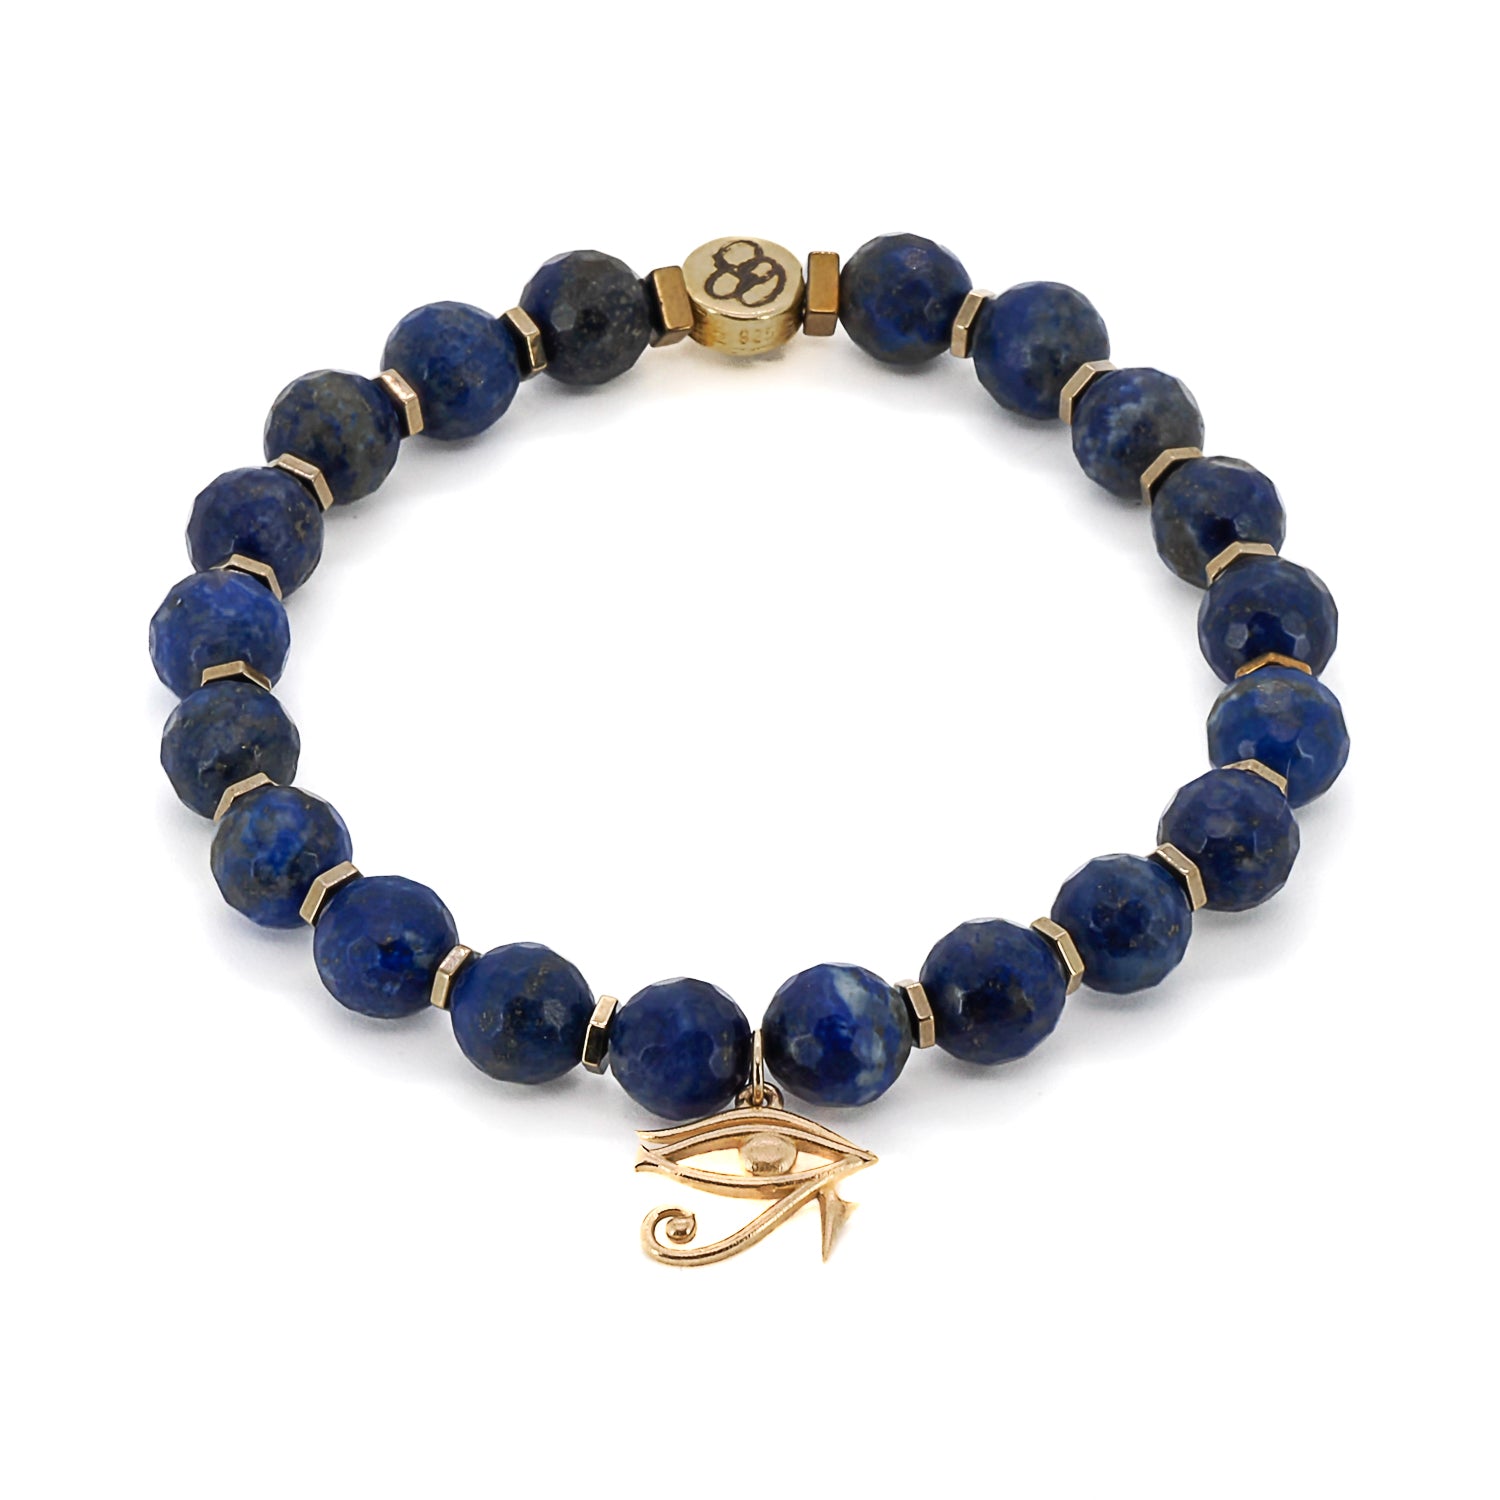 Experience the allure and spirituality of the Solid Gold Eye of Ra Spiritual Beaded Bracelet, handcrafted with lapis lazuli stones and a solid gold charm.